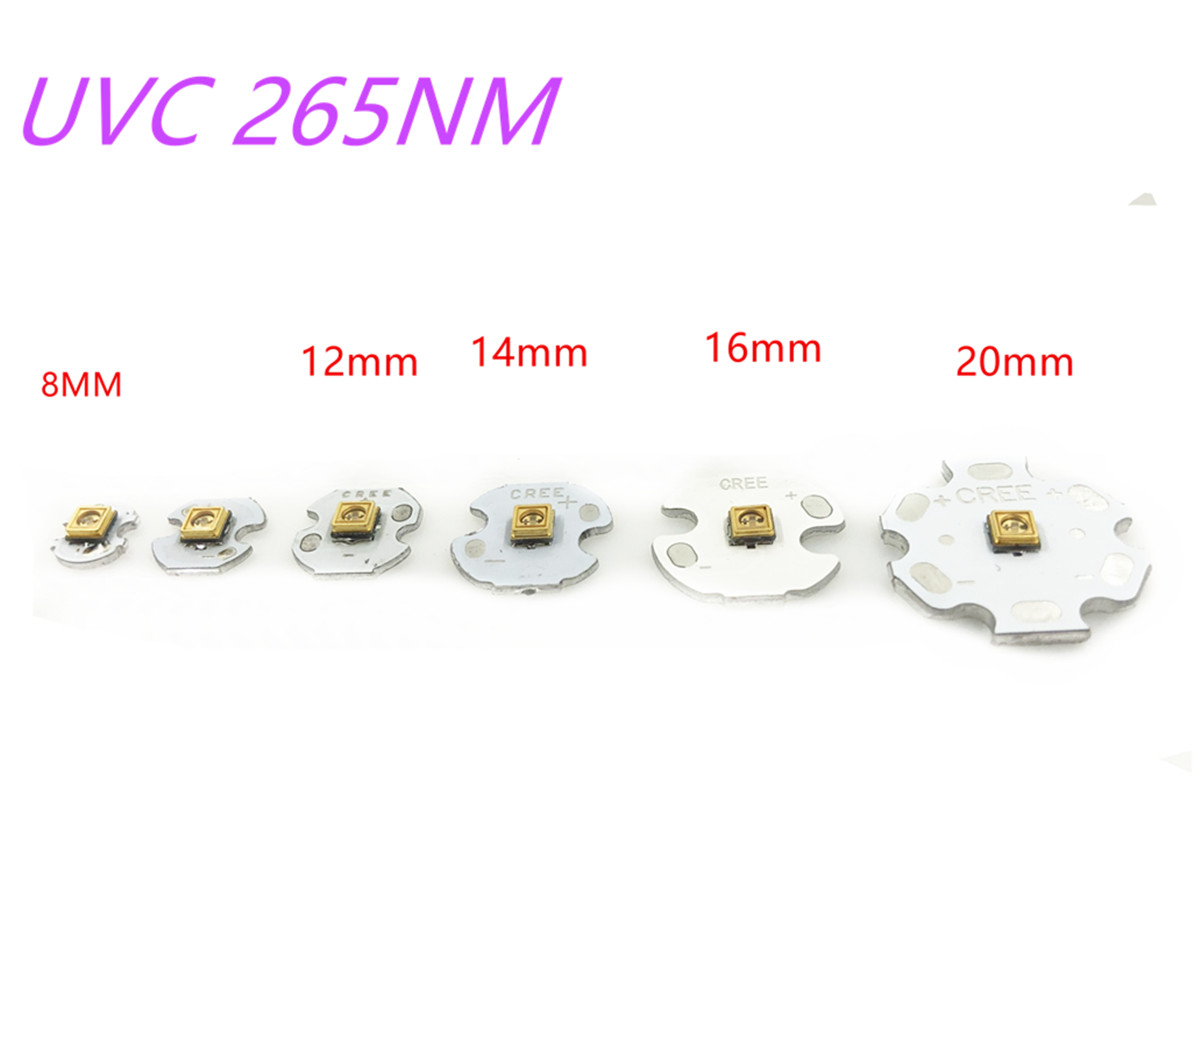 LG 1W 265nm UVC LED Lamp beads for UV disinfection Medical equipment 275nm SMD4545 Deep ultraviolet Chip 5-9V 150mA